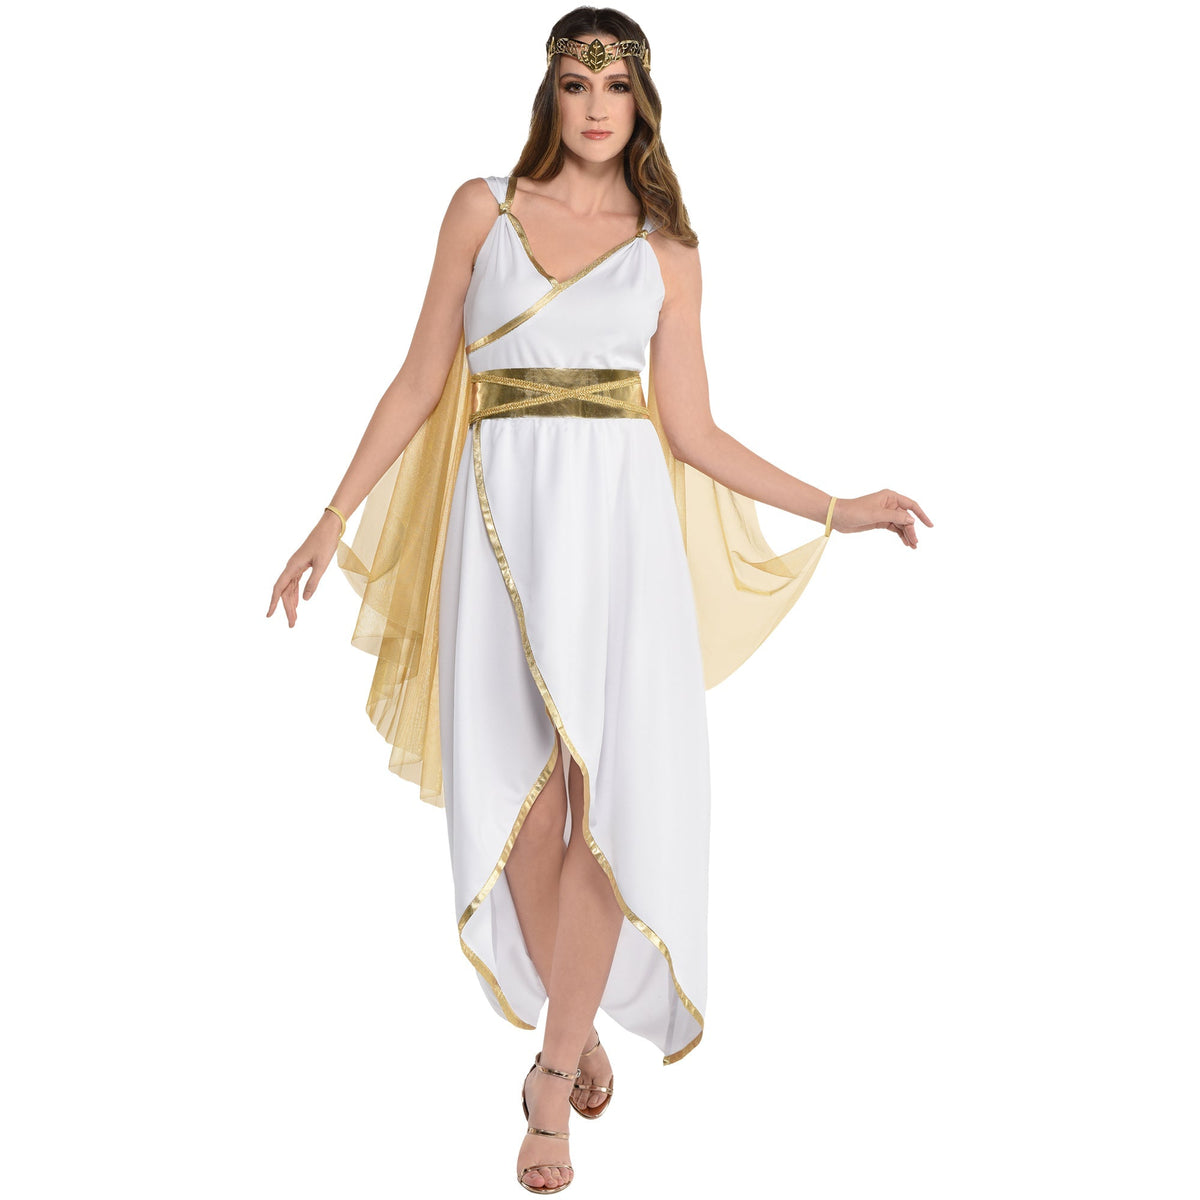 SUIT YOURSELF COSTUME CO. Costume Accessories Greek Goddess Dress for Adults 192937231531